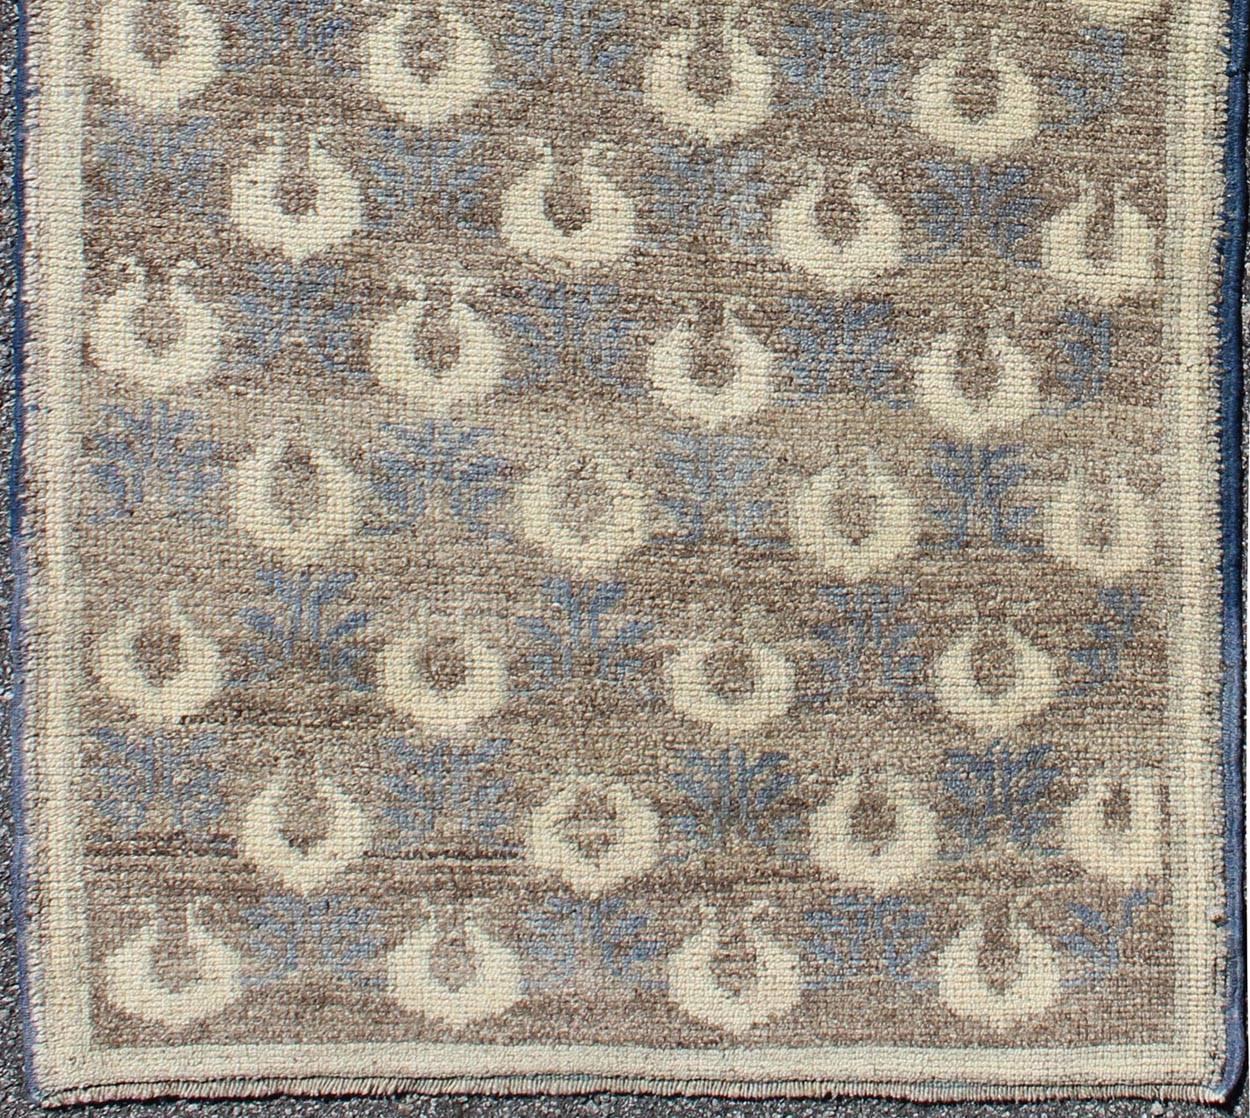 Light brown, gray-blue, and cream Turkish Tulu vintage rug with latticework, rug en-112175, country of origin / type: Turkey / Tulu, circa 1940s

This vintage Turkish Tulu carpet (circa mid-20th century) features an all-over pattern of vining